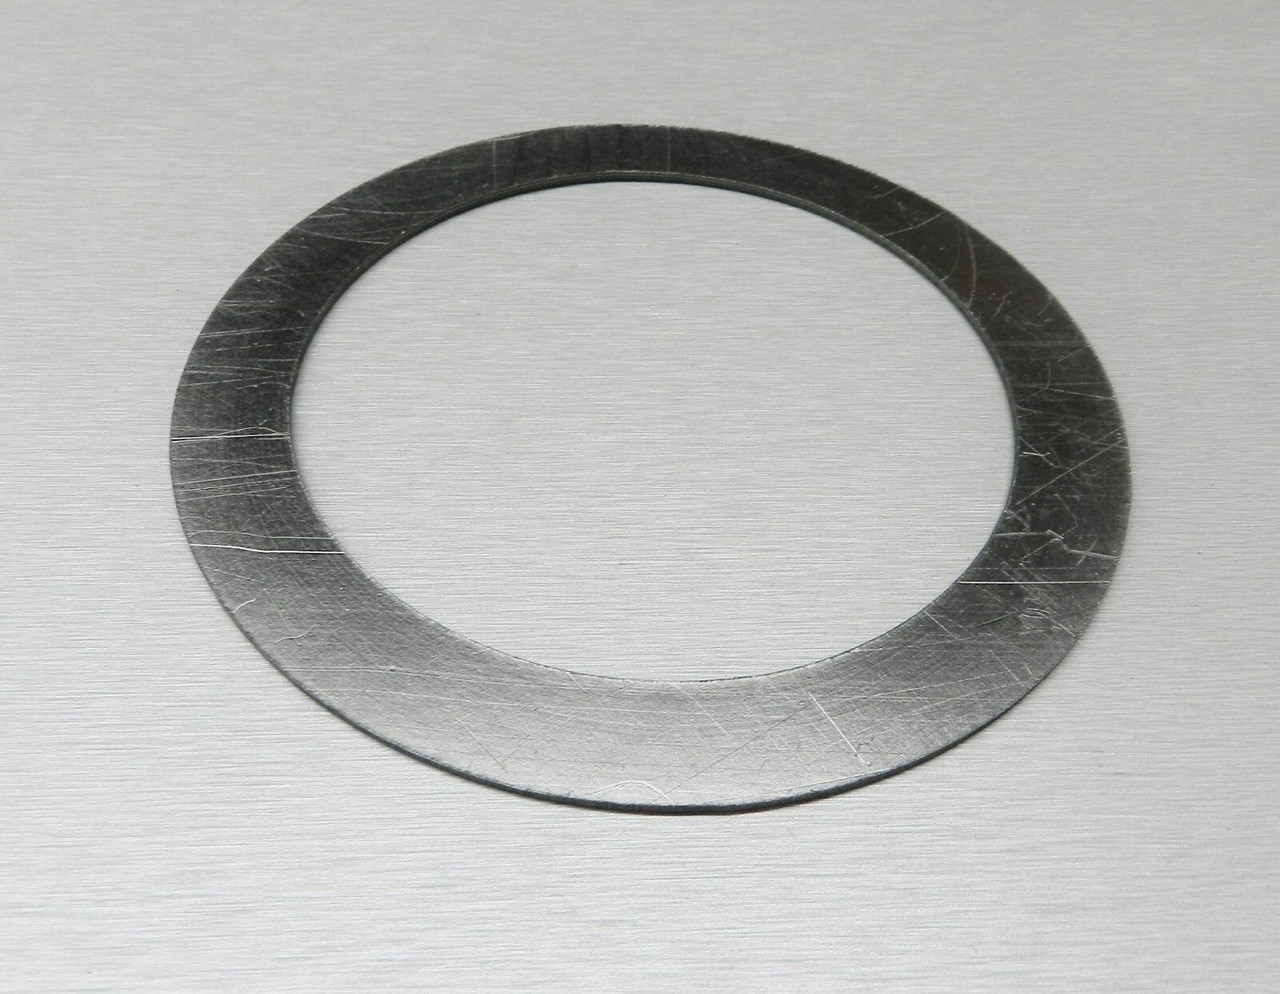 Graphite Gasket 3-1/2" Flask Perforated Flasks Vacuum Casting Gaskets for 3.5" D